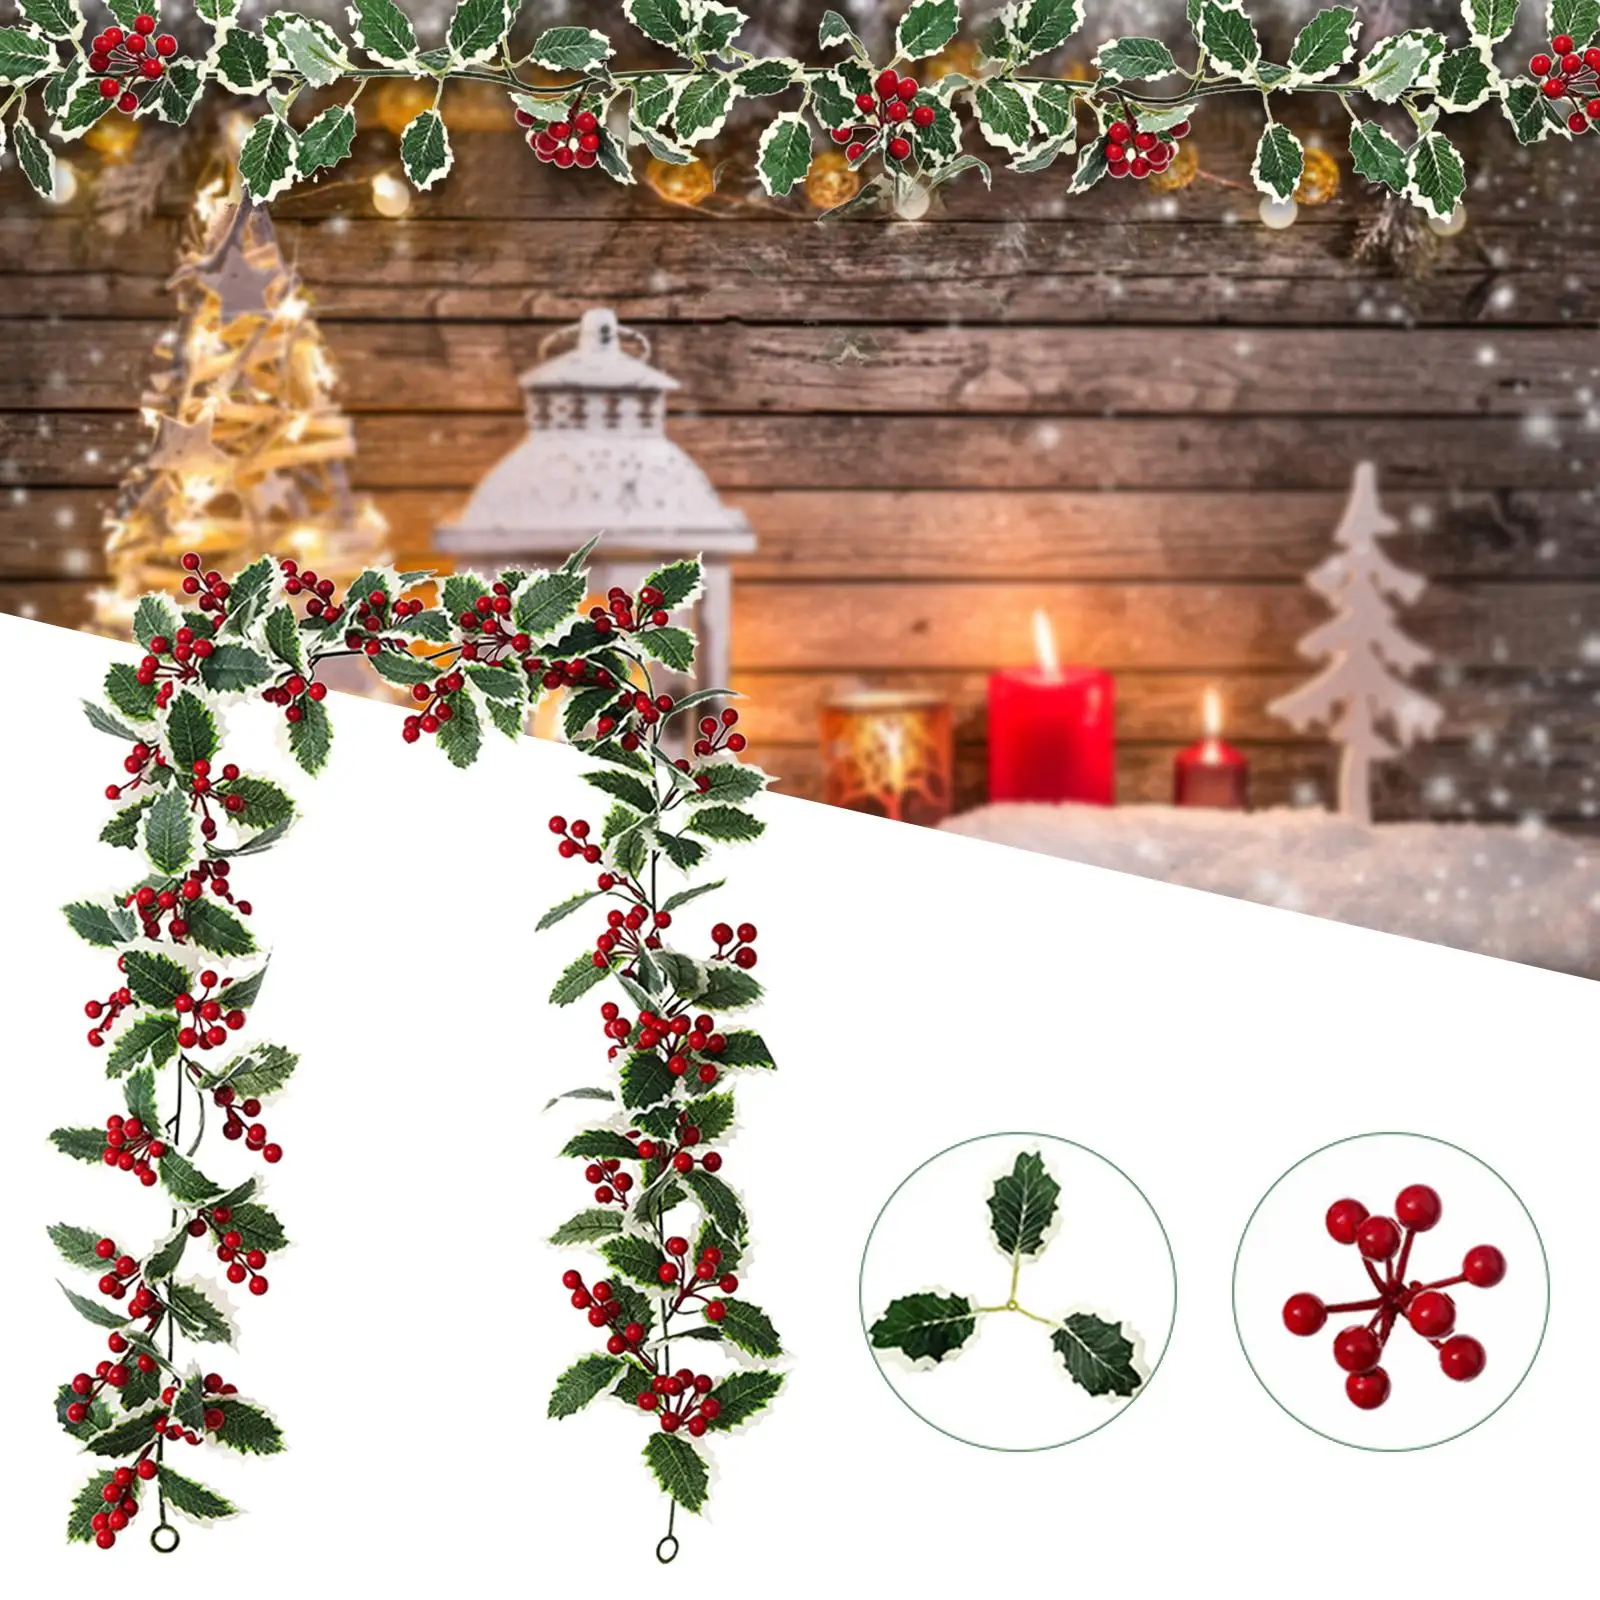 Artificial Blossom Flowers Garland Greenery Wreaths Ornament Hanging for Indoor Outdoor Porch Restaurant Party Decoration